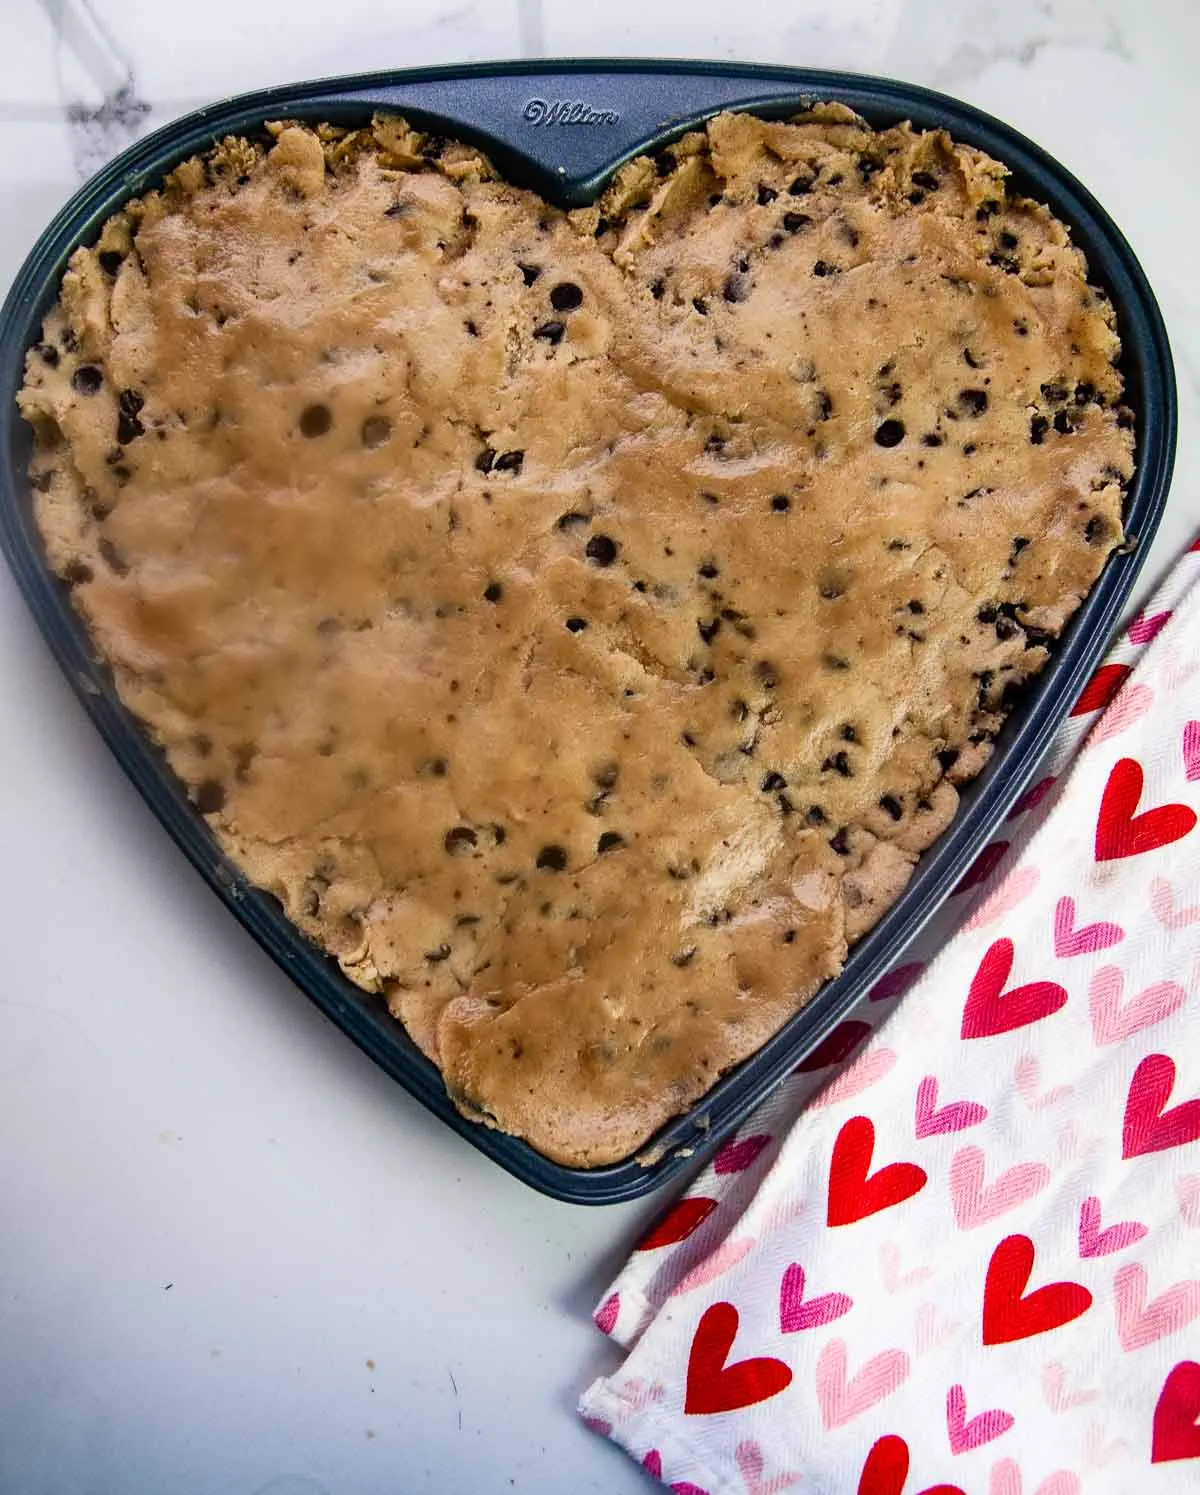 Chocolate chip cookie dough in a heart pan ready to be baked into a Valentine's Day treat.